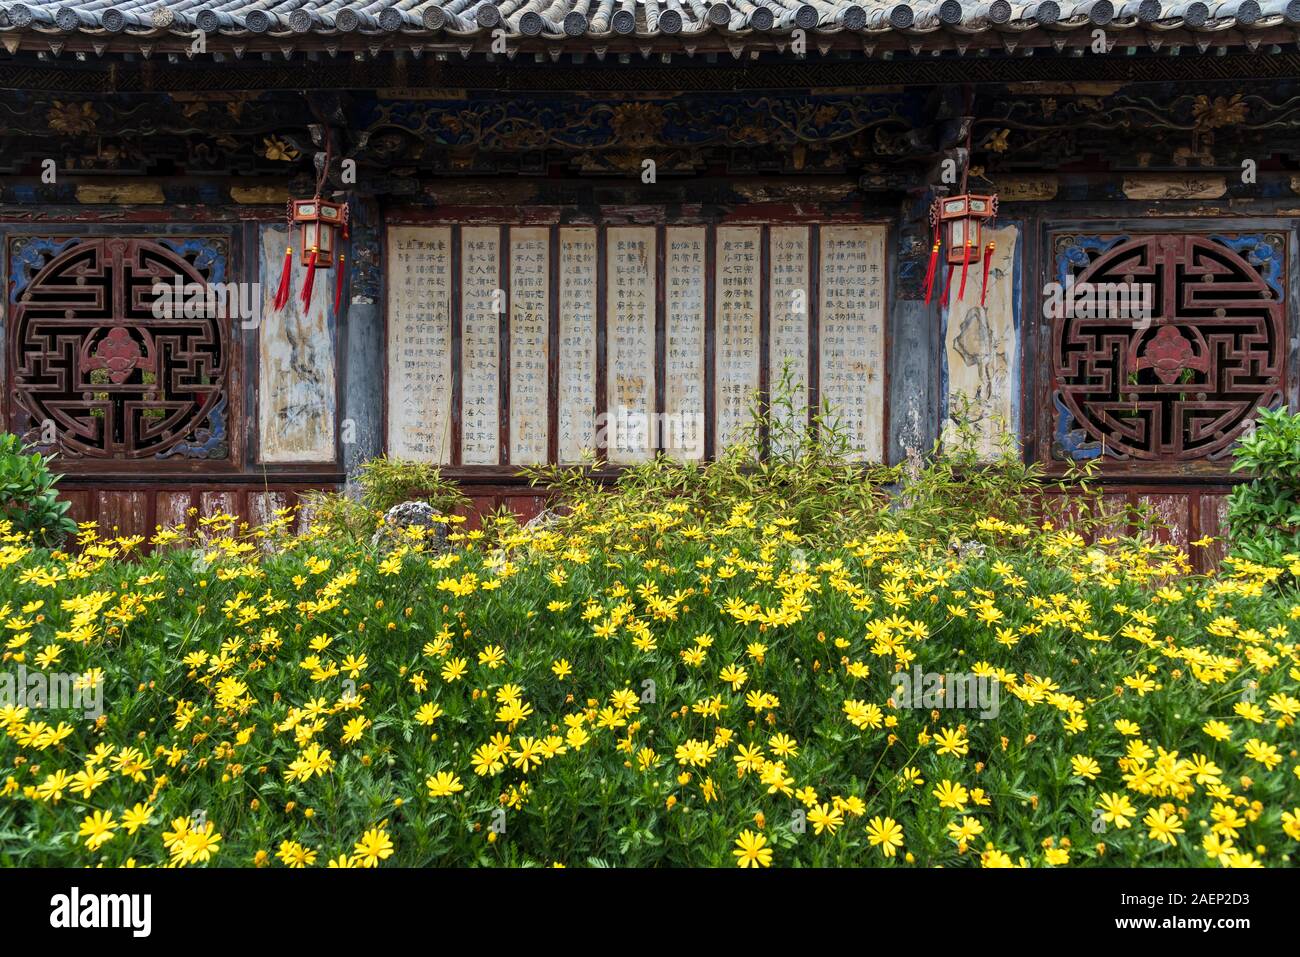 March 7, 2019: Some plants in front of a historical building in Jianshui, Yunnan, China Stock Photo